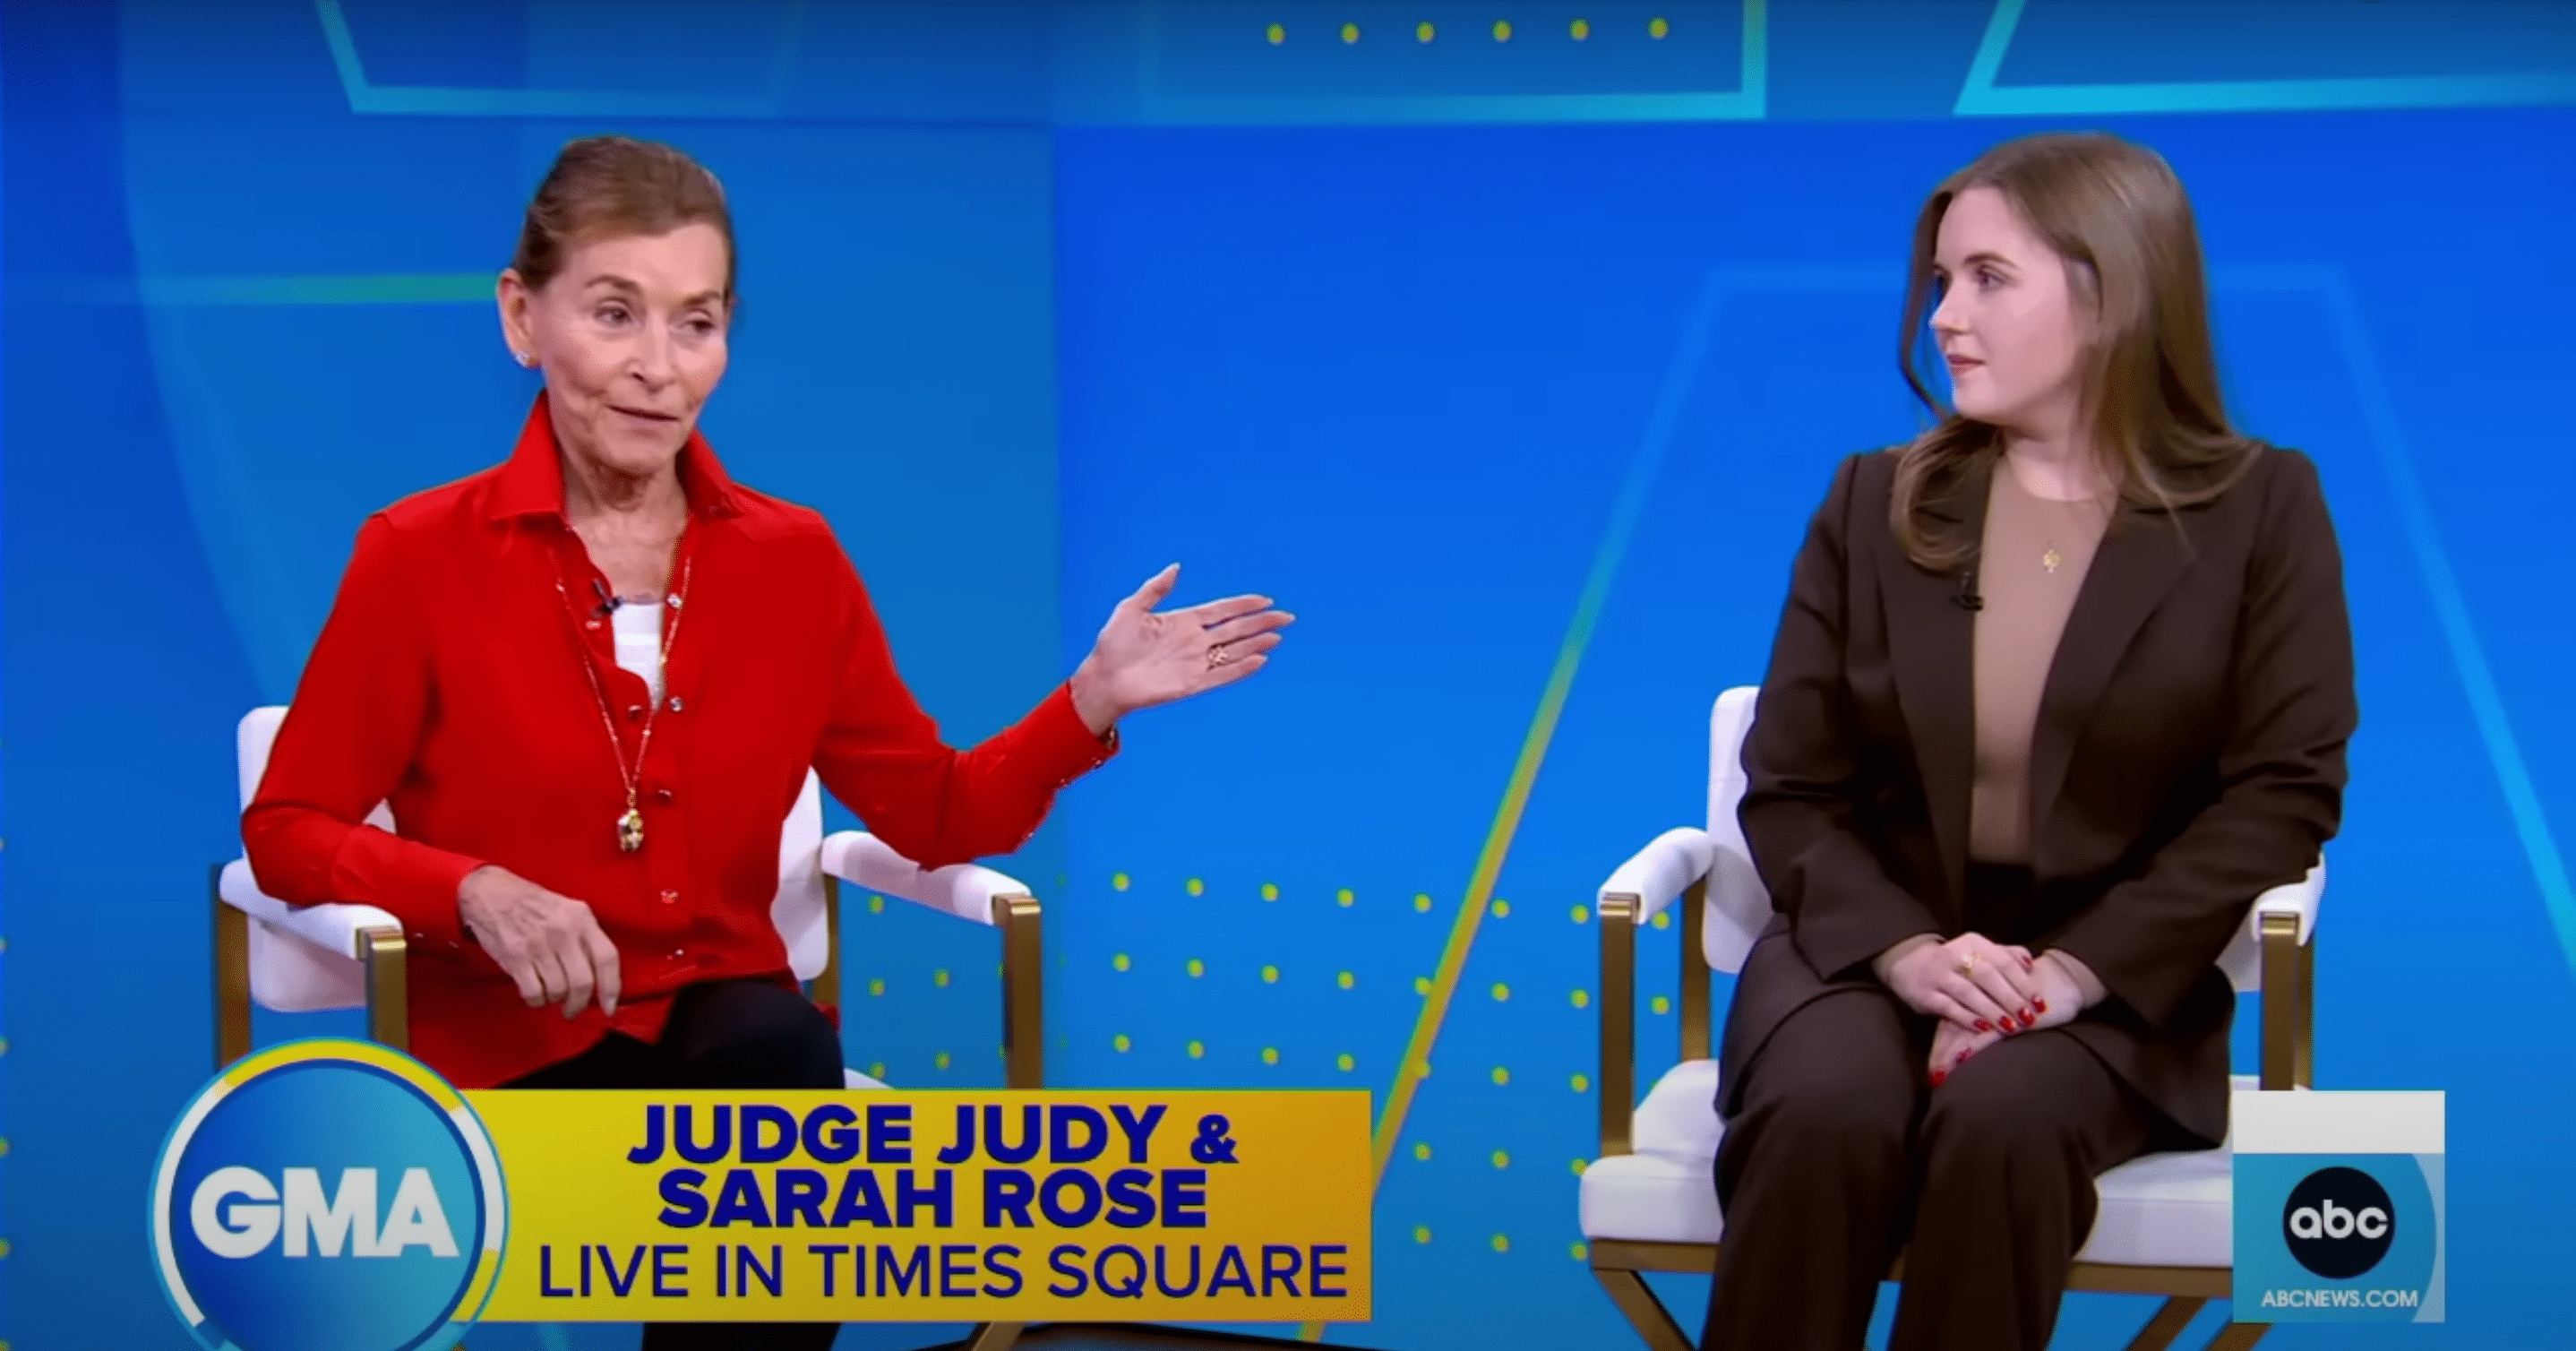 Sarah Rose and Judge Judy in an interview | Source: GoodMorningAmerica